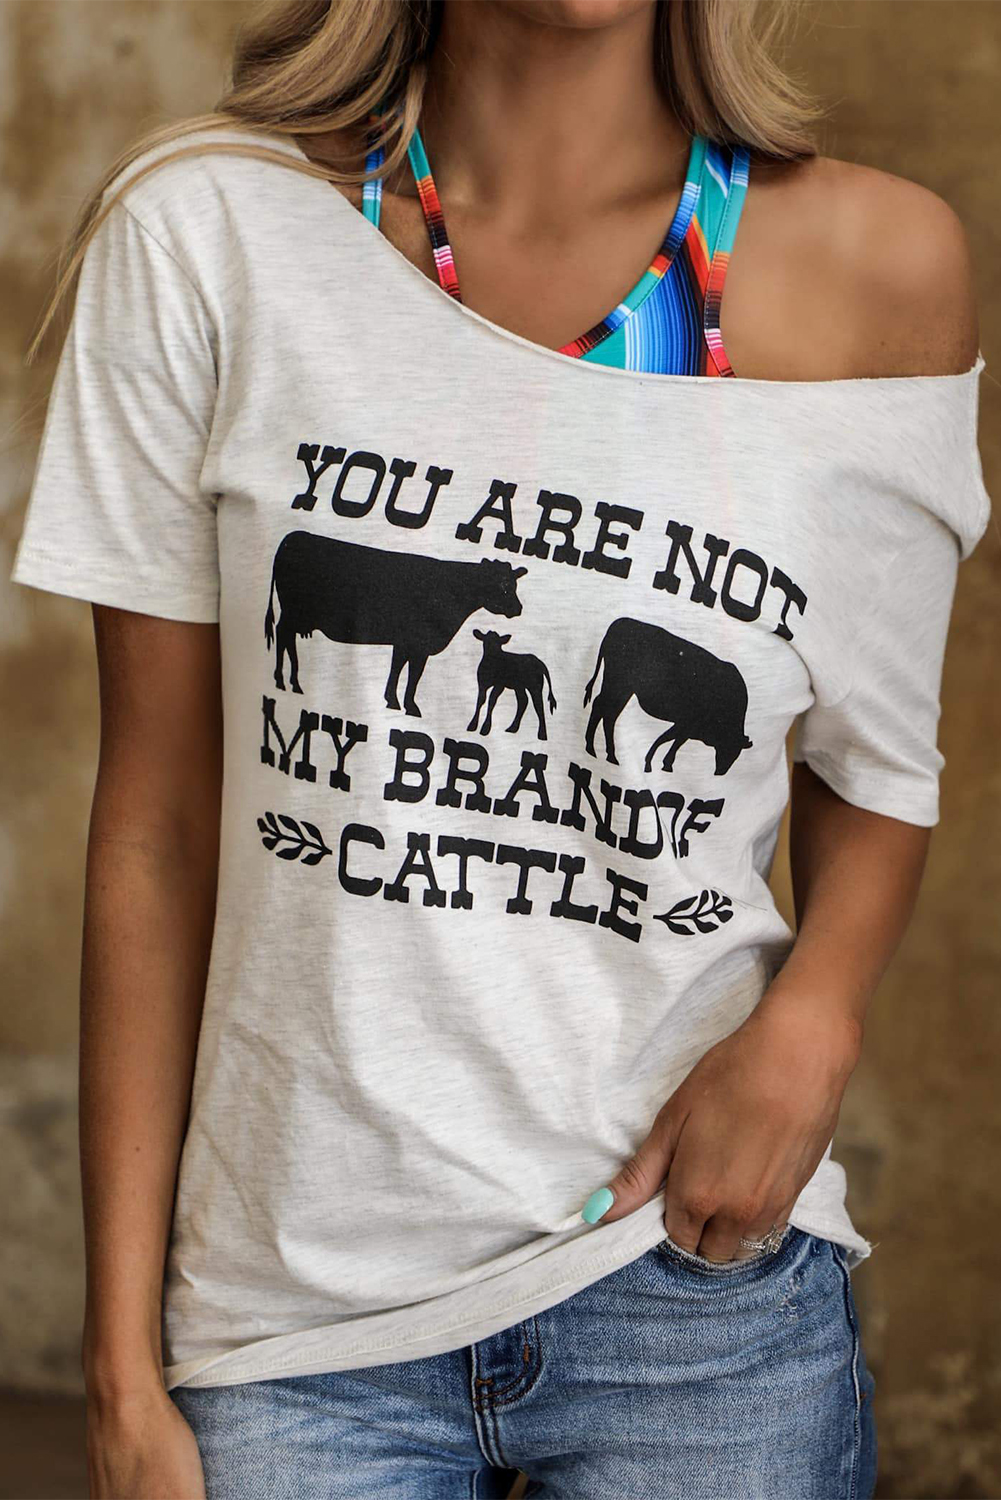 Wholesale Pre Order Tops, Cheap Not My Brand Of Cattle Tee Online